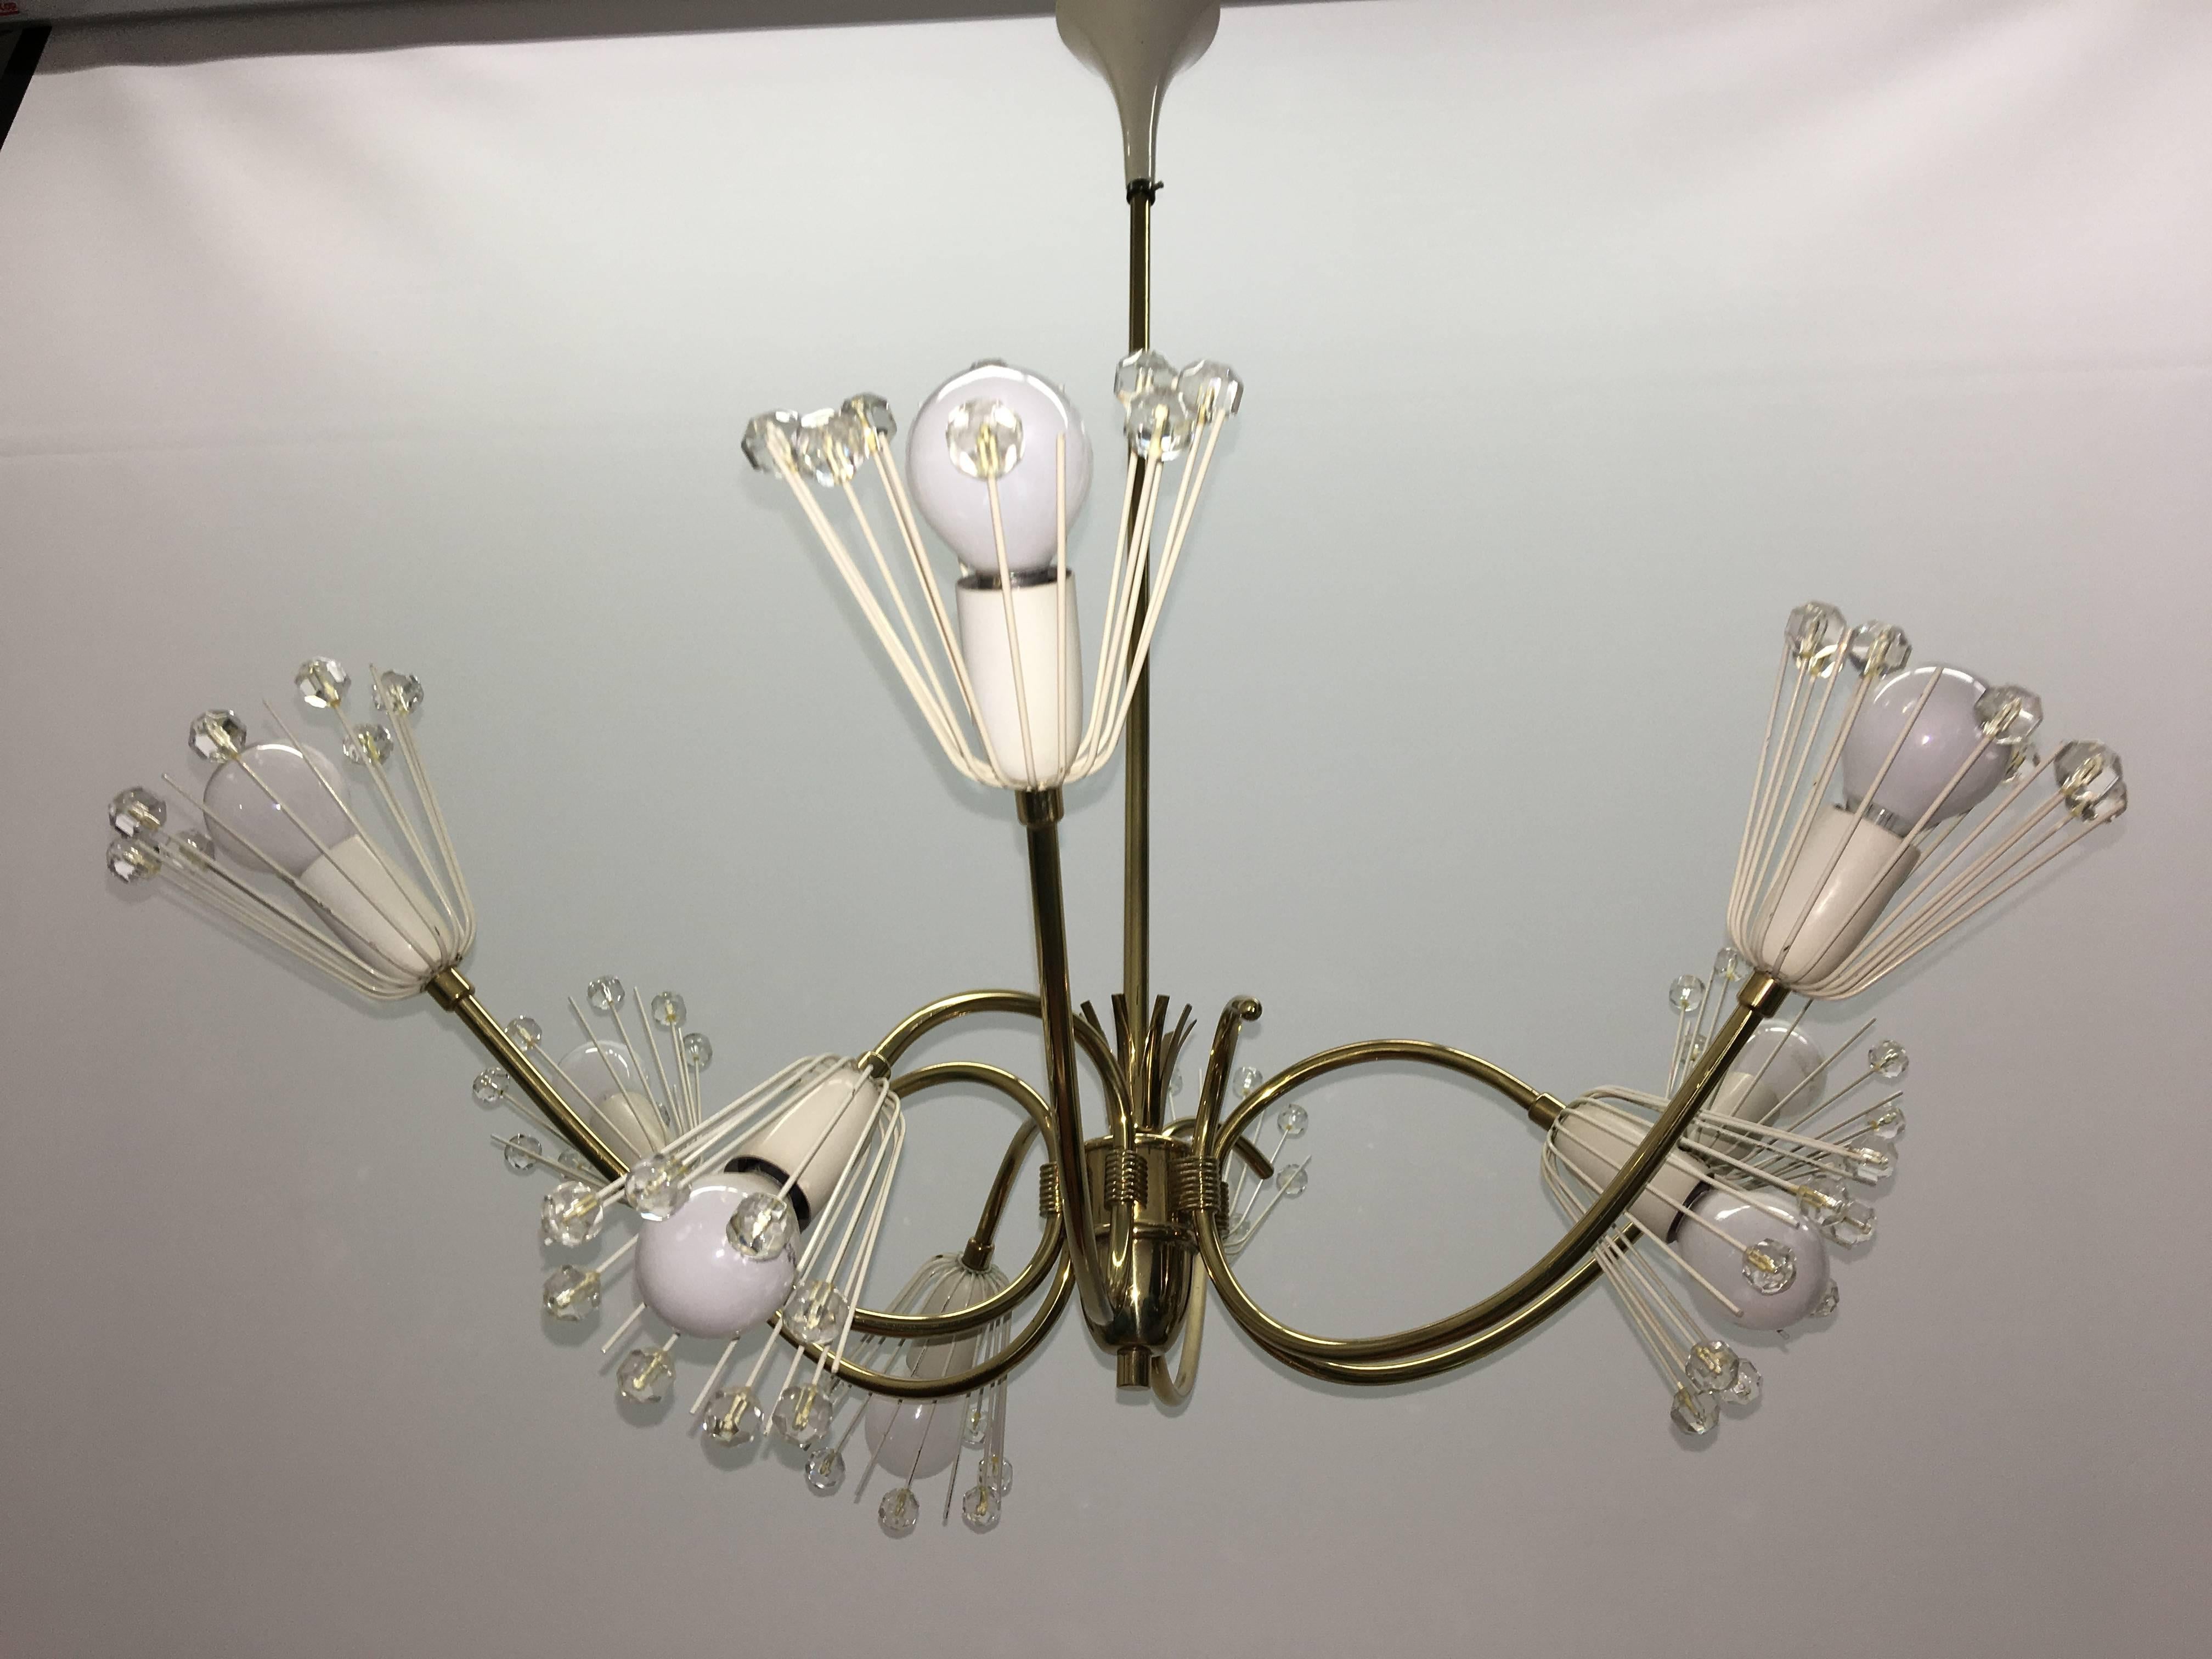 This ceiling lamp called 